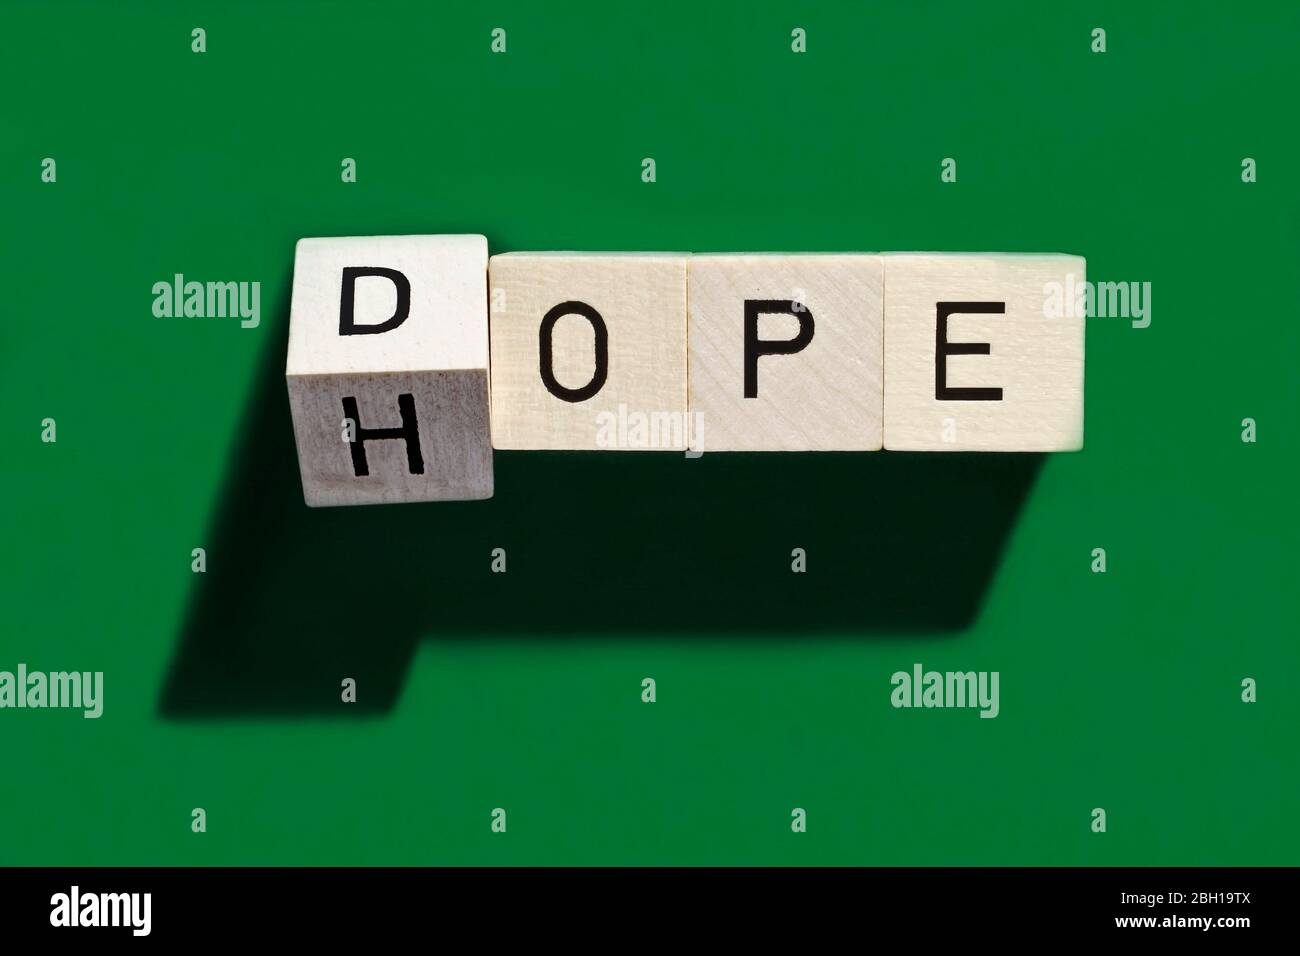 dope or hope, symbol picture Stock Photo